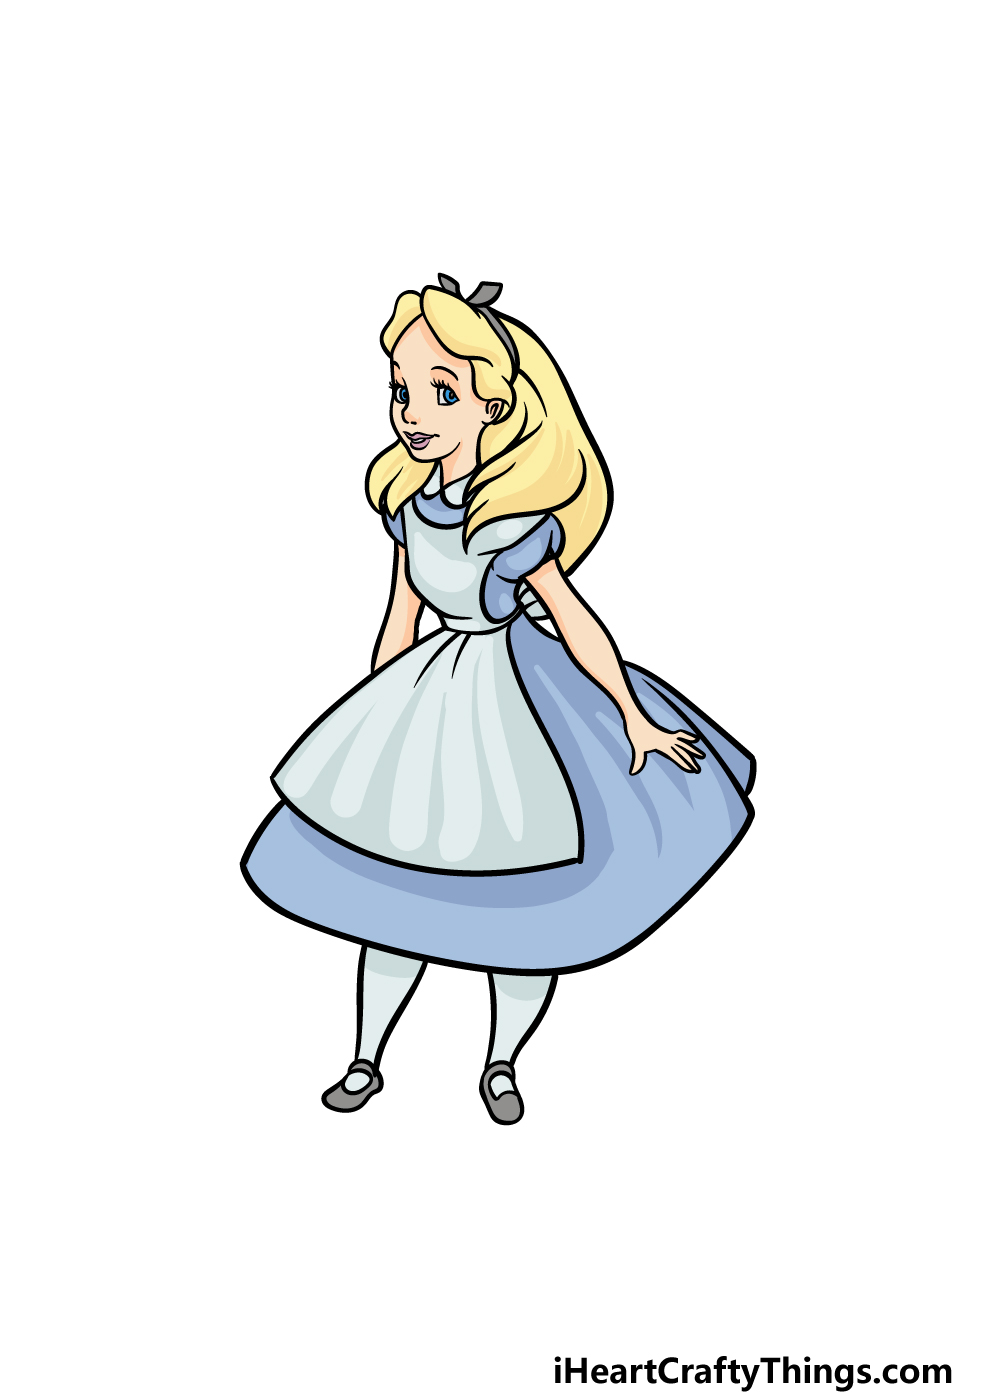 Alice In Wonderland Drawing - How To Draw Alice In Wonderland Step By Step